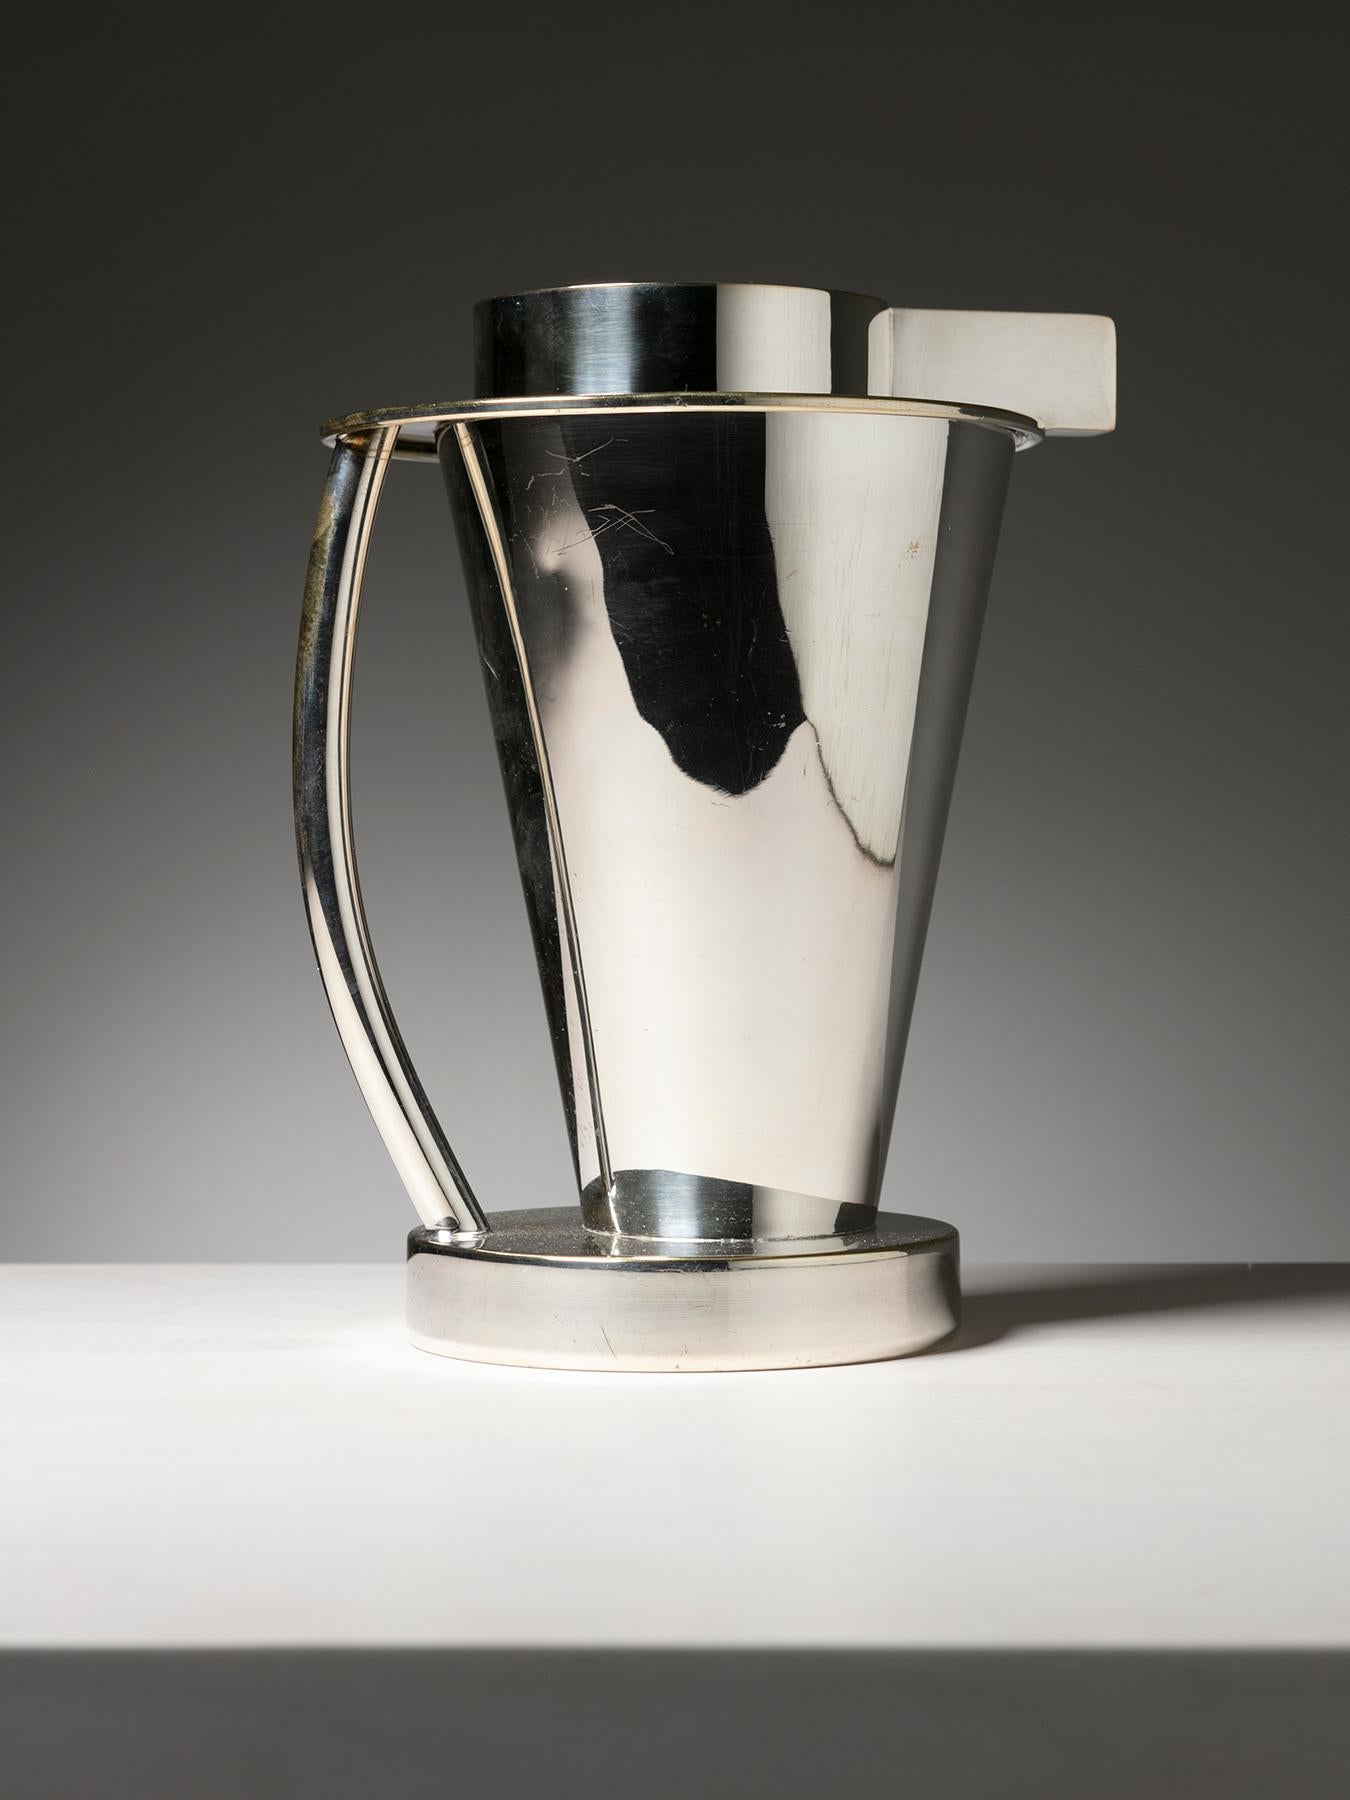 Remarkable metal pitcher by Ettore Sottsass for Design Gallery Milano.